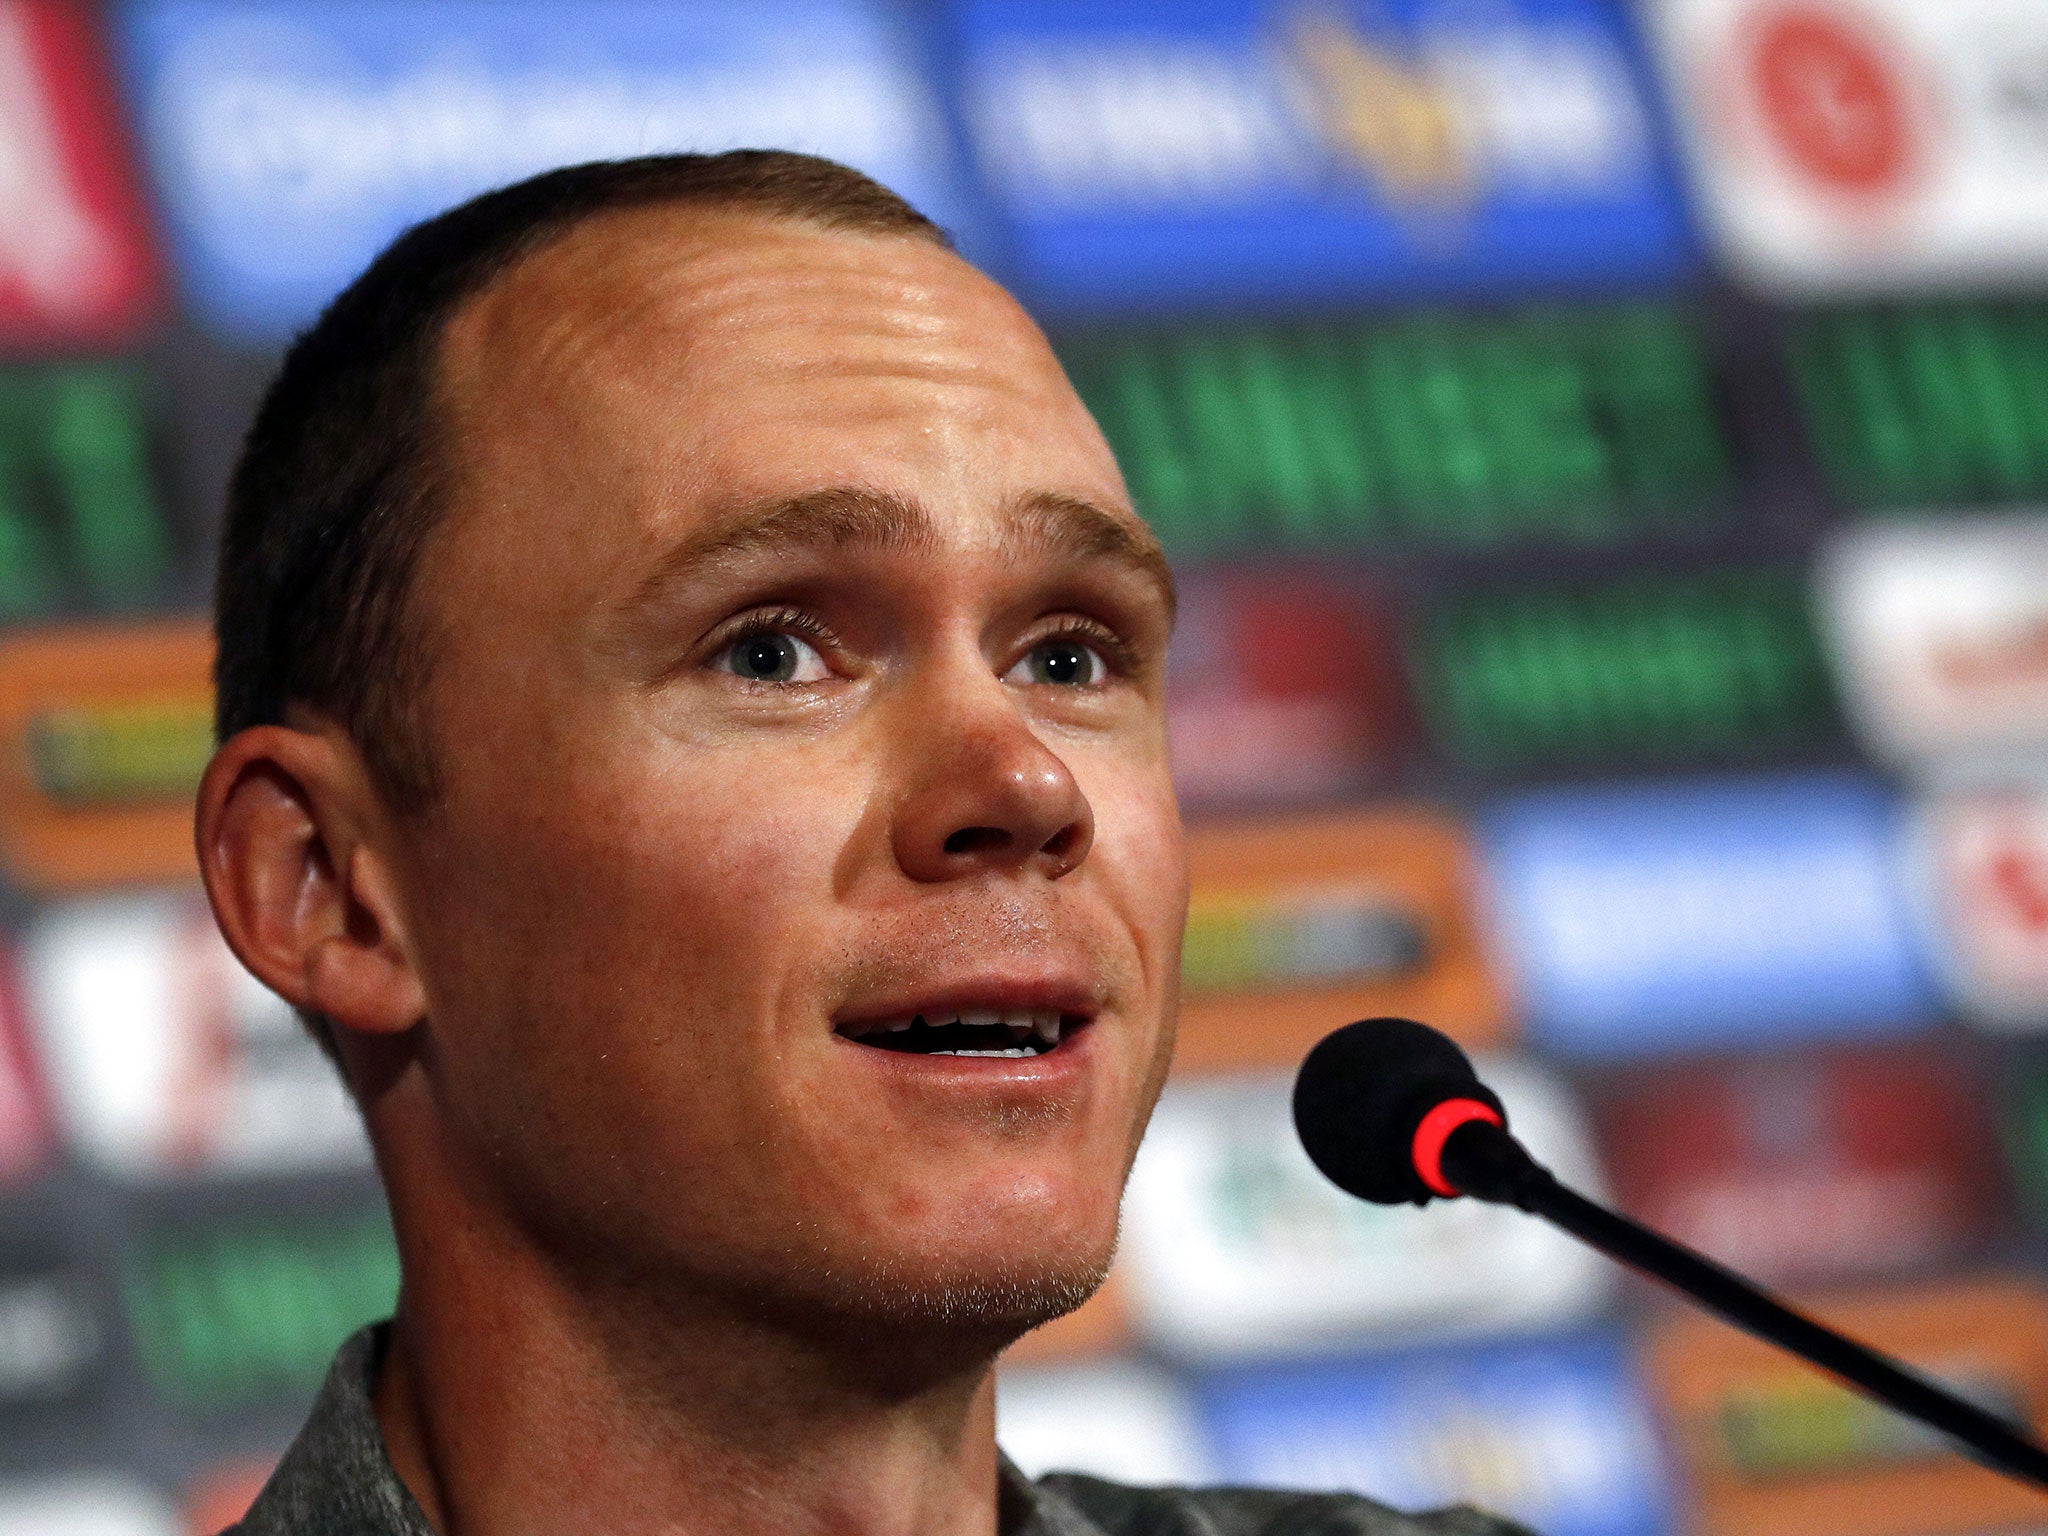 Team Sky have been paid a reported £1.2million to bring Froome to Israel